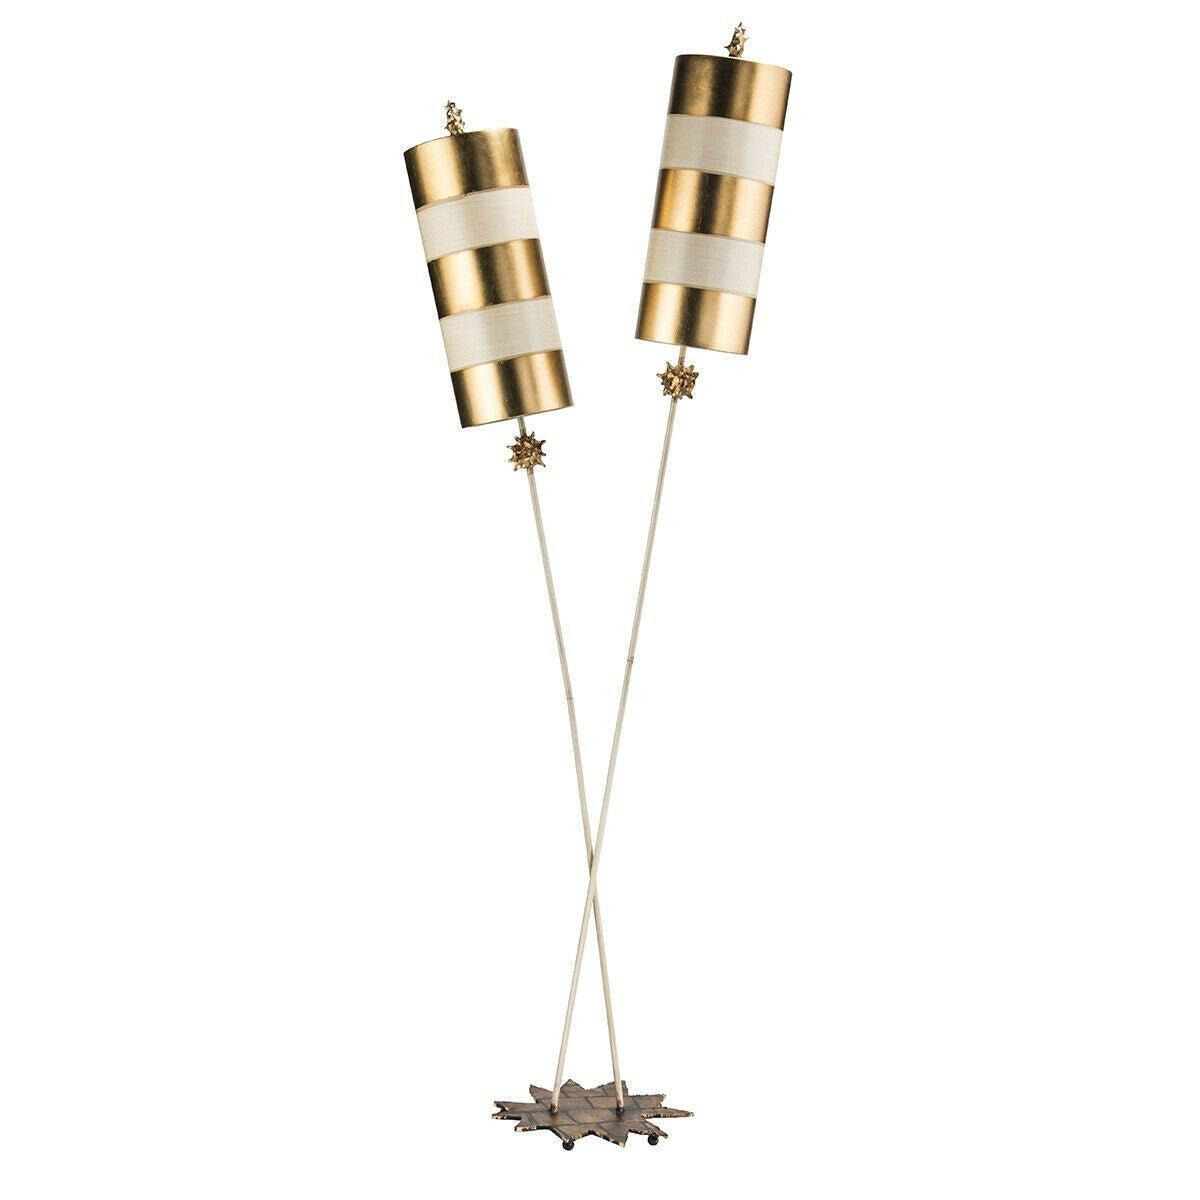 2 Bulb Twin Floor Lamp Star Shaped Base Gold Taupe Striped Shades LED E27 60W - image 1